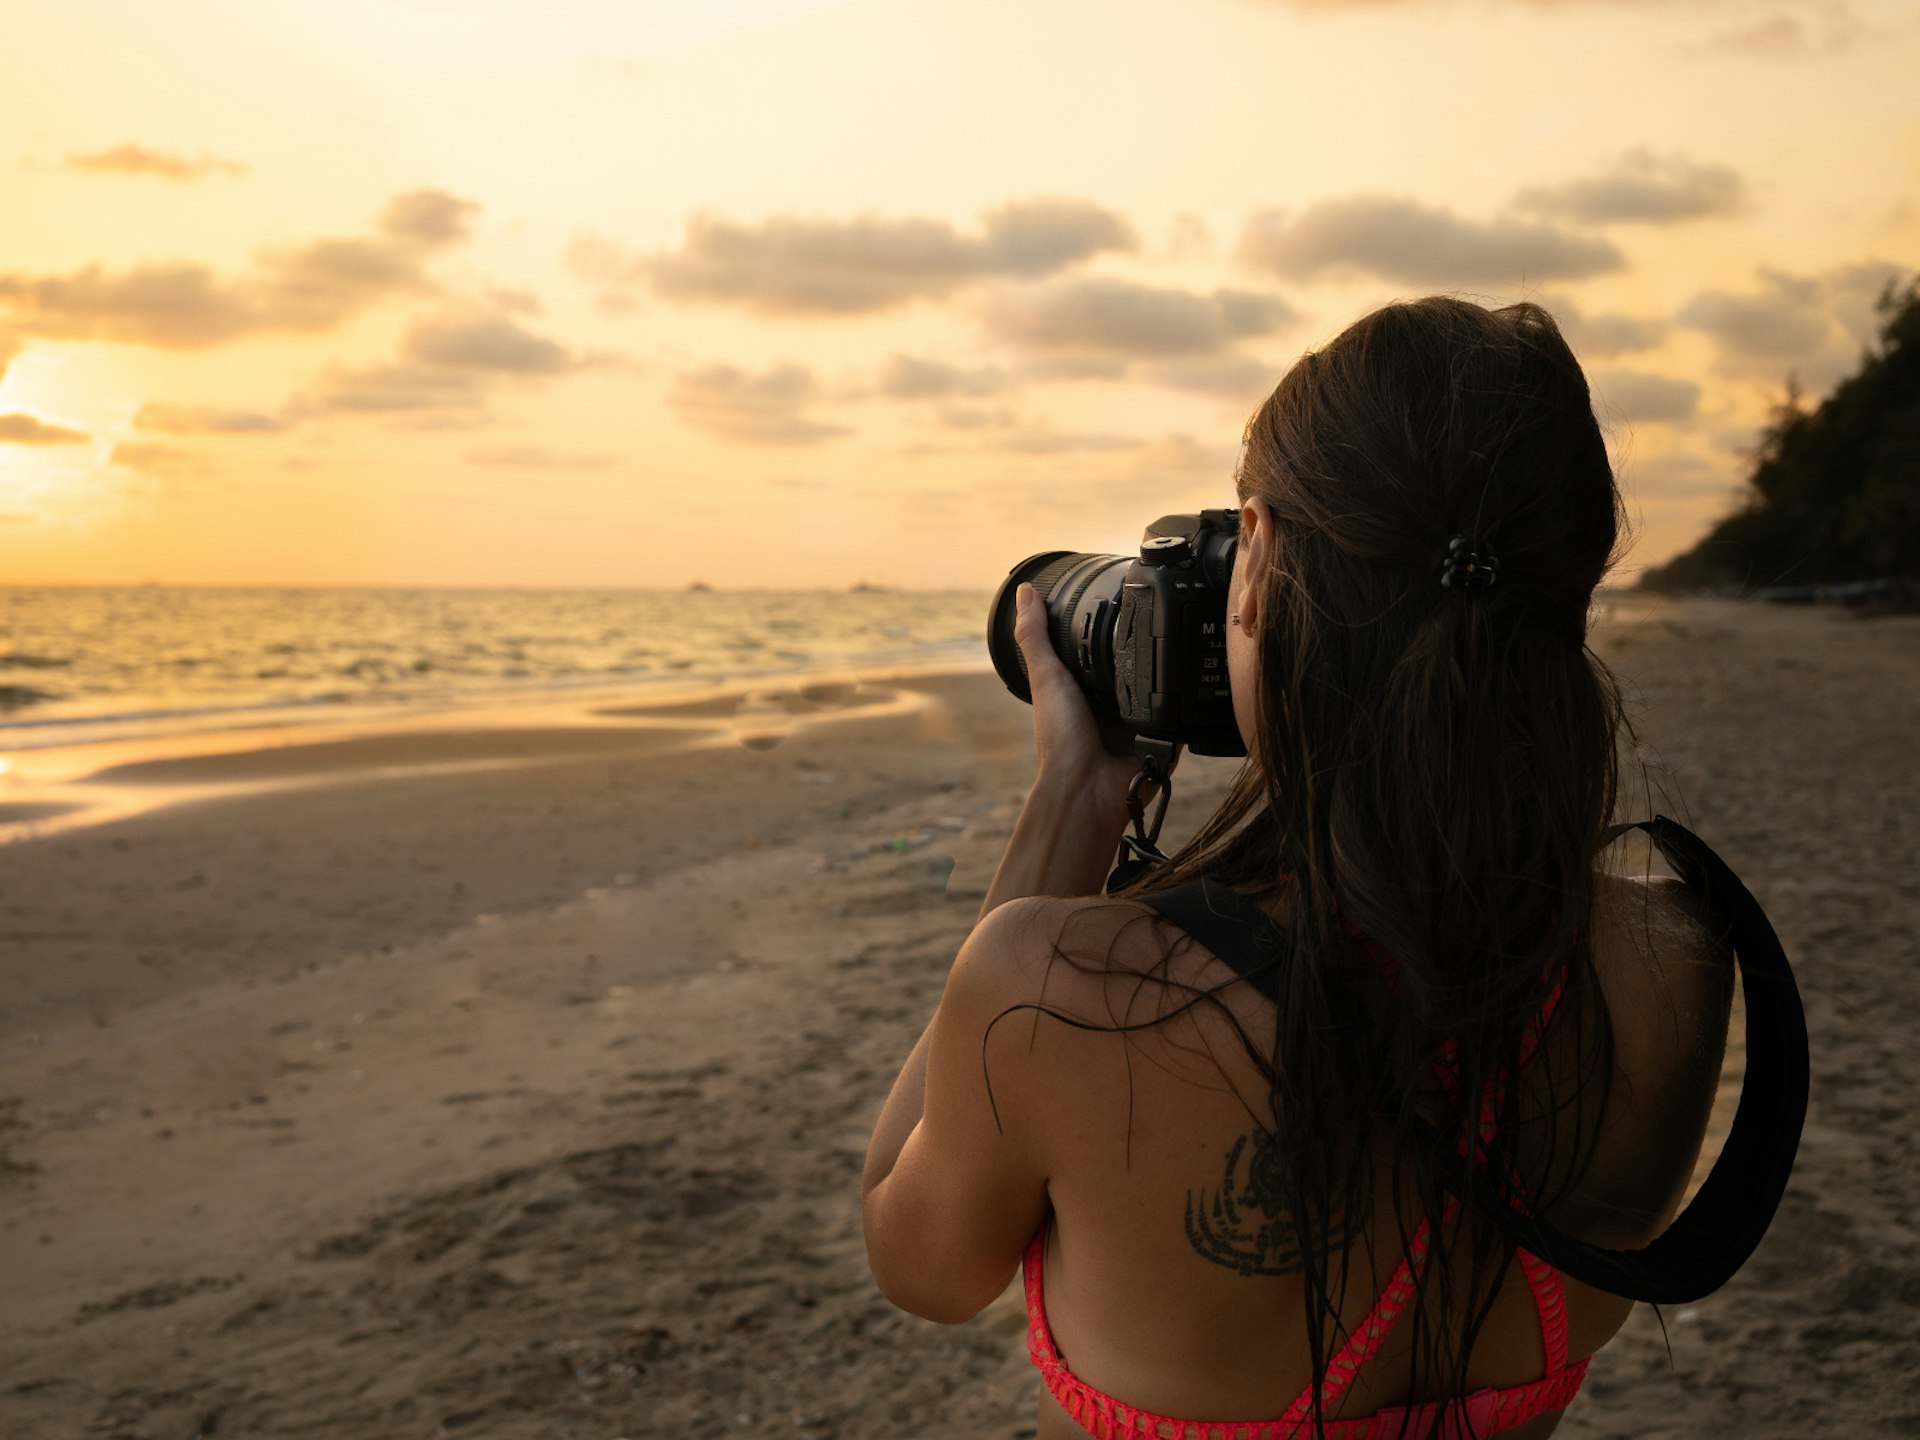 A woman photographing a beach at sunset